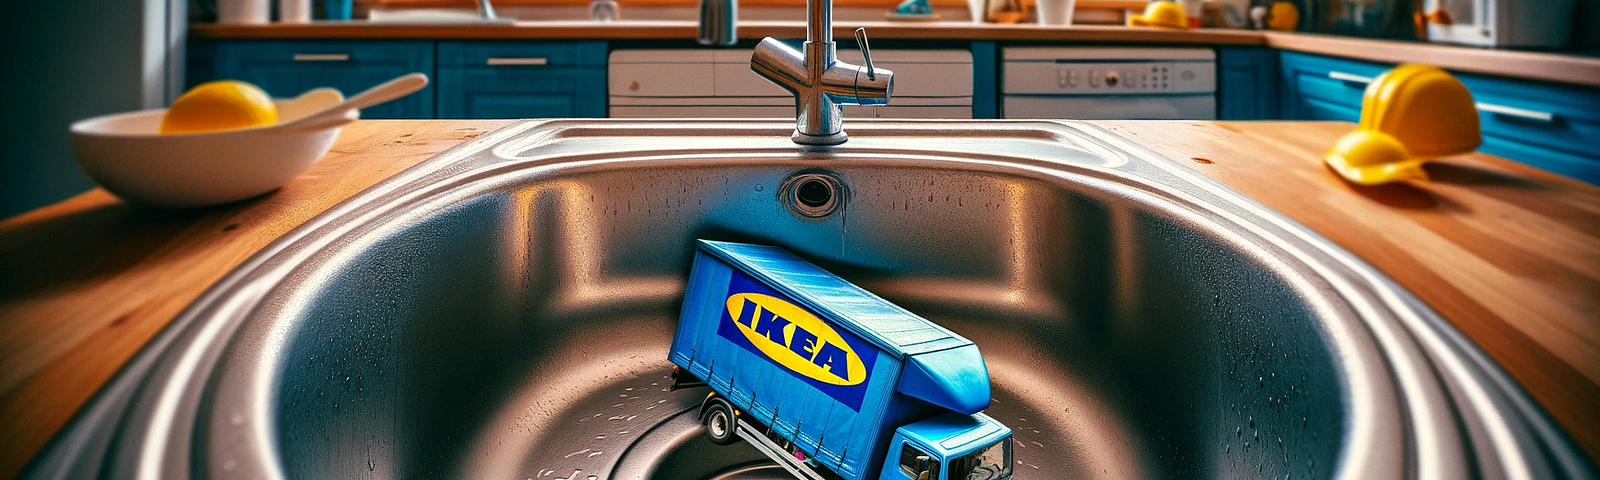 ChatGPT & DALL-E generated panoramic image of an Ikea delivery truck going down a sink’s drain, depicted in a surreal manner.